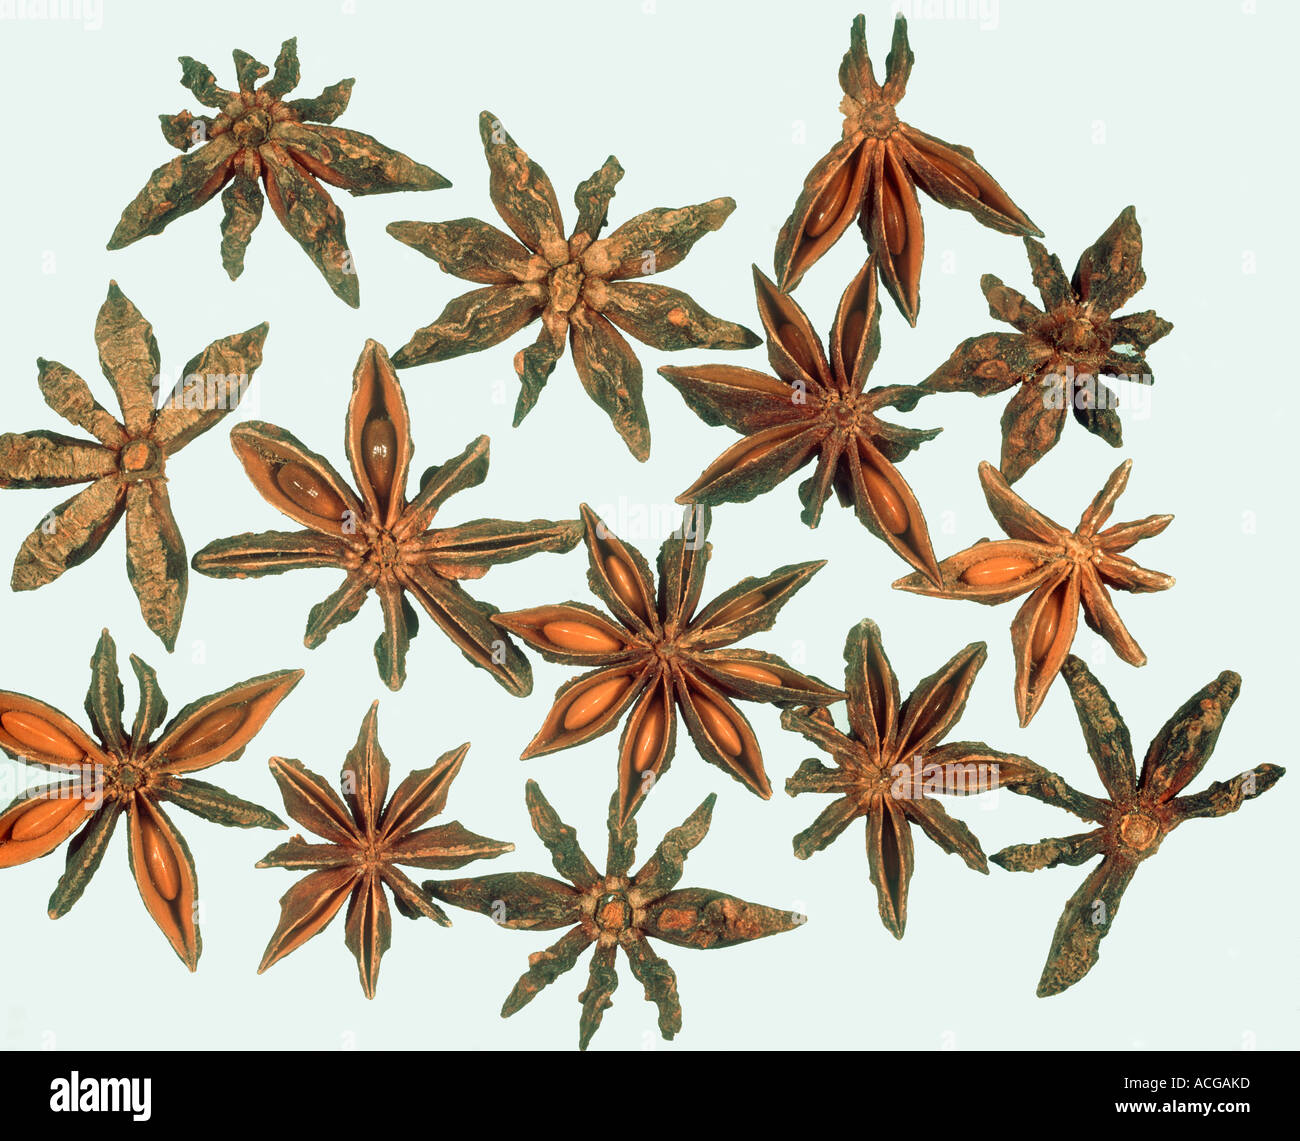 Star anise fruit Pimpinella anisum as purchased for cooking Stock Photo